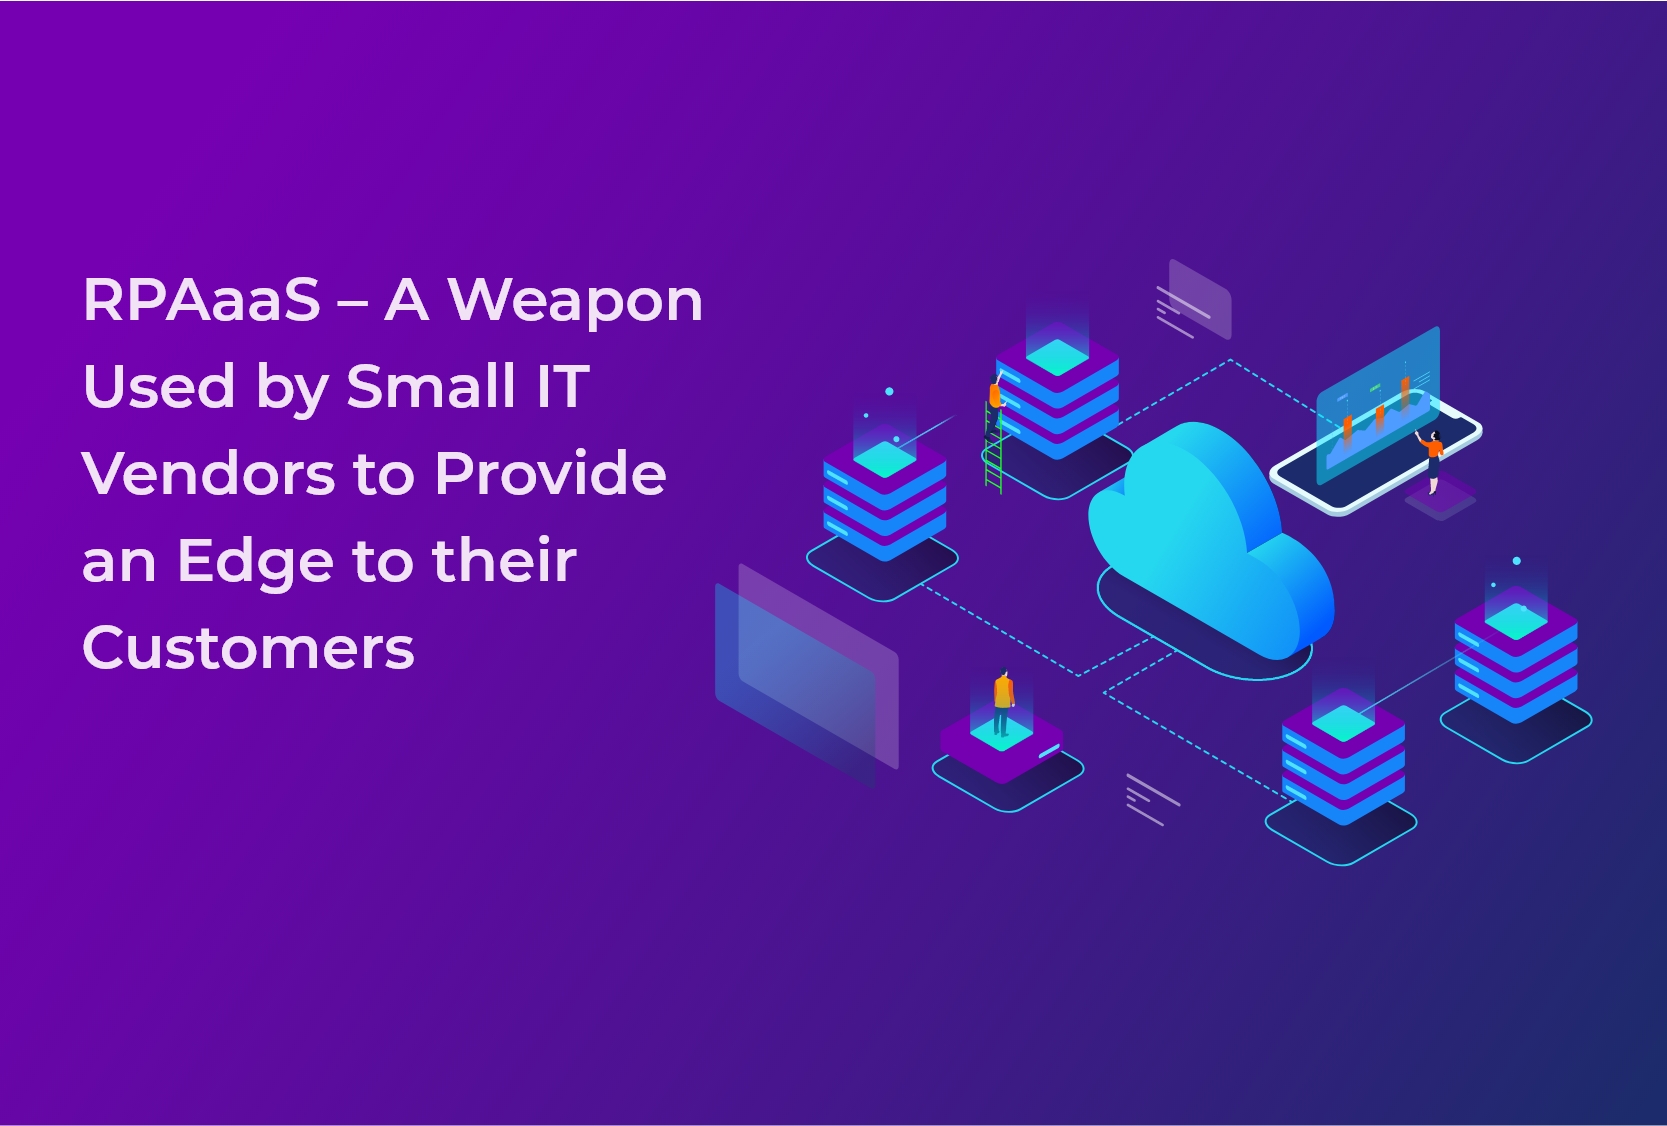 RPAaaS - A Weapon Used by Small IT Vendors to Provide an Edge to their Customers